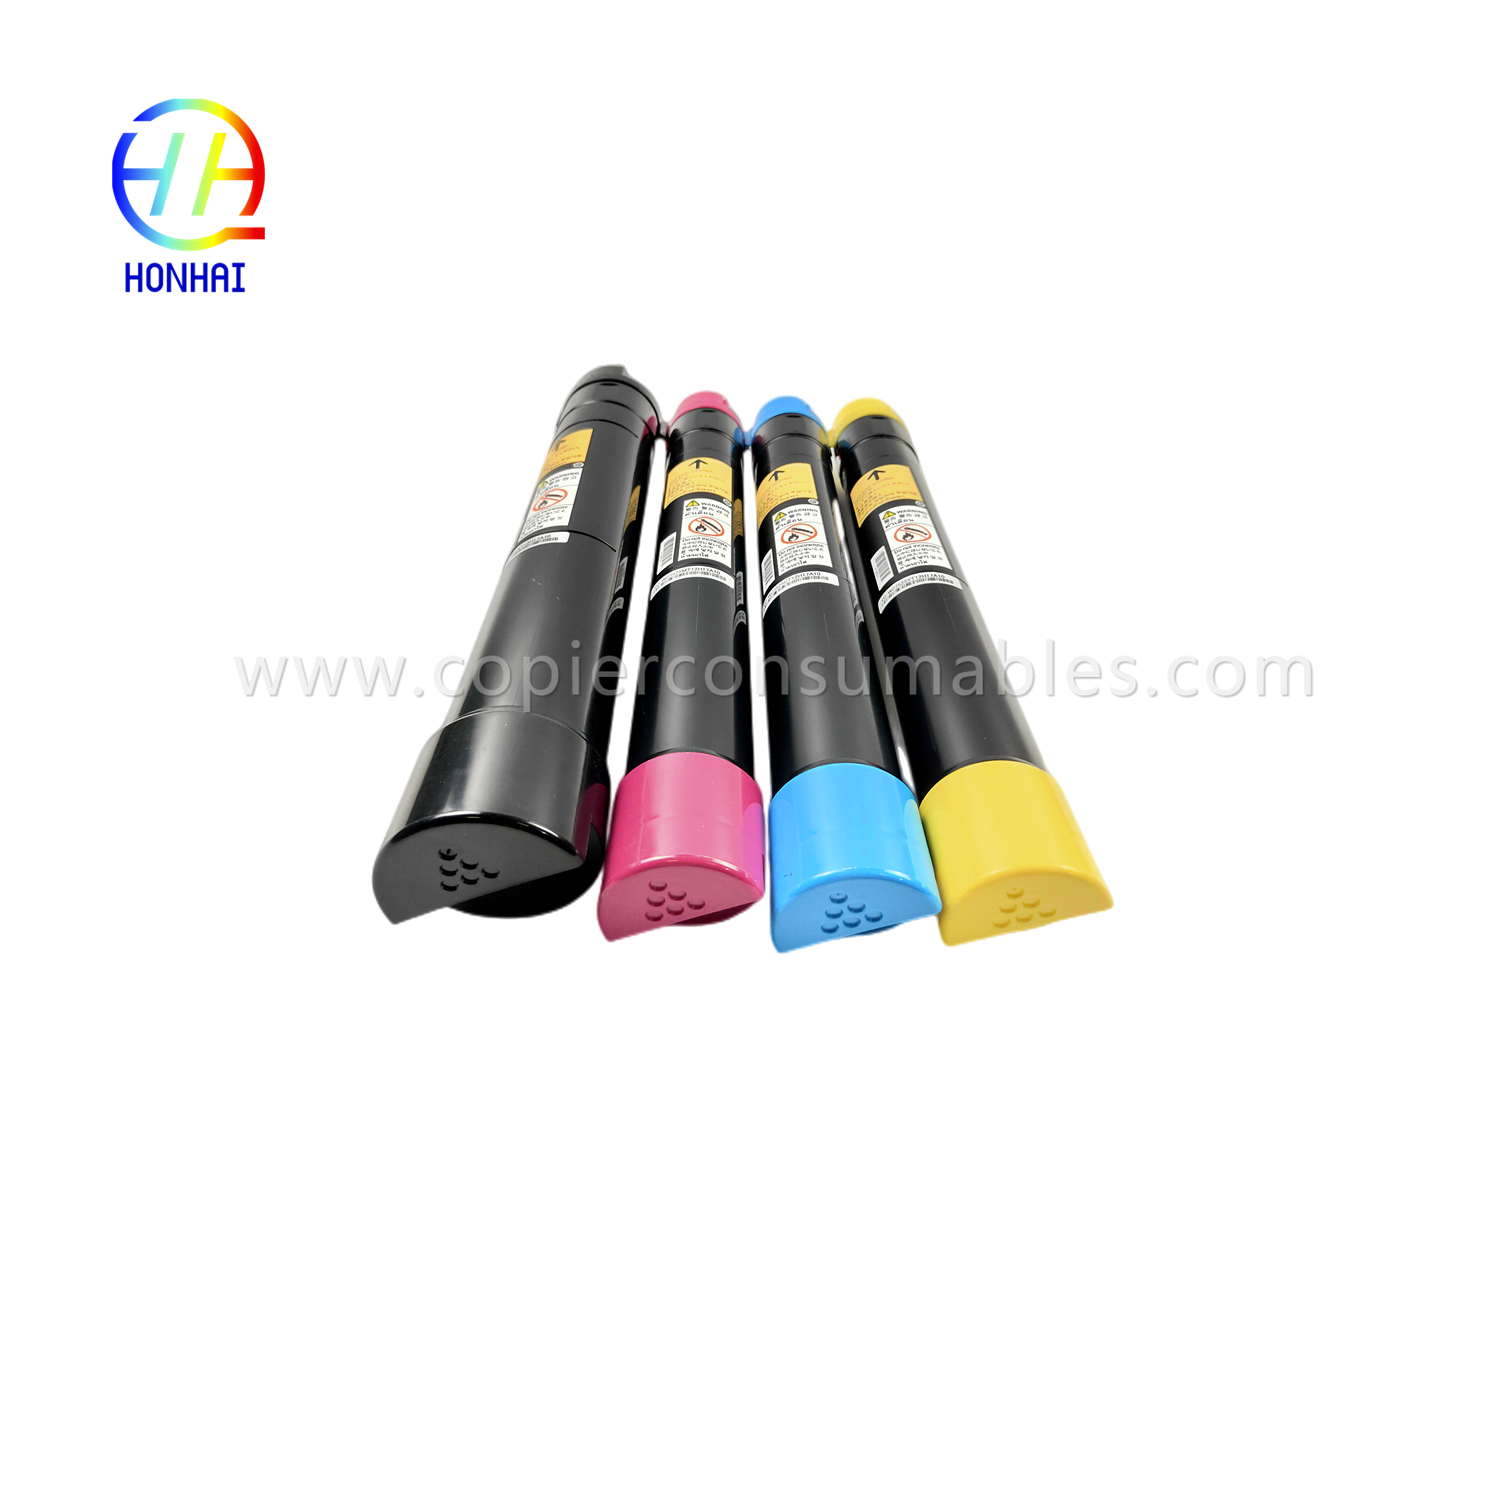 https://www.copierconsumables.com/toner-cartridge-imported-powder-set-bcmy-for-xerox-workcentre-7830-7835-7845-7855-7970-7525-7530-7535-7545-7556-006r01513- 006r01514-006r01515-006r01516-product/